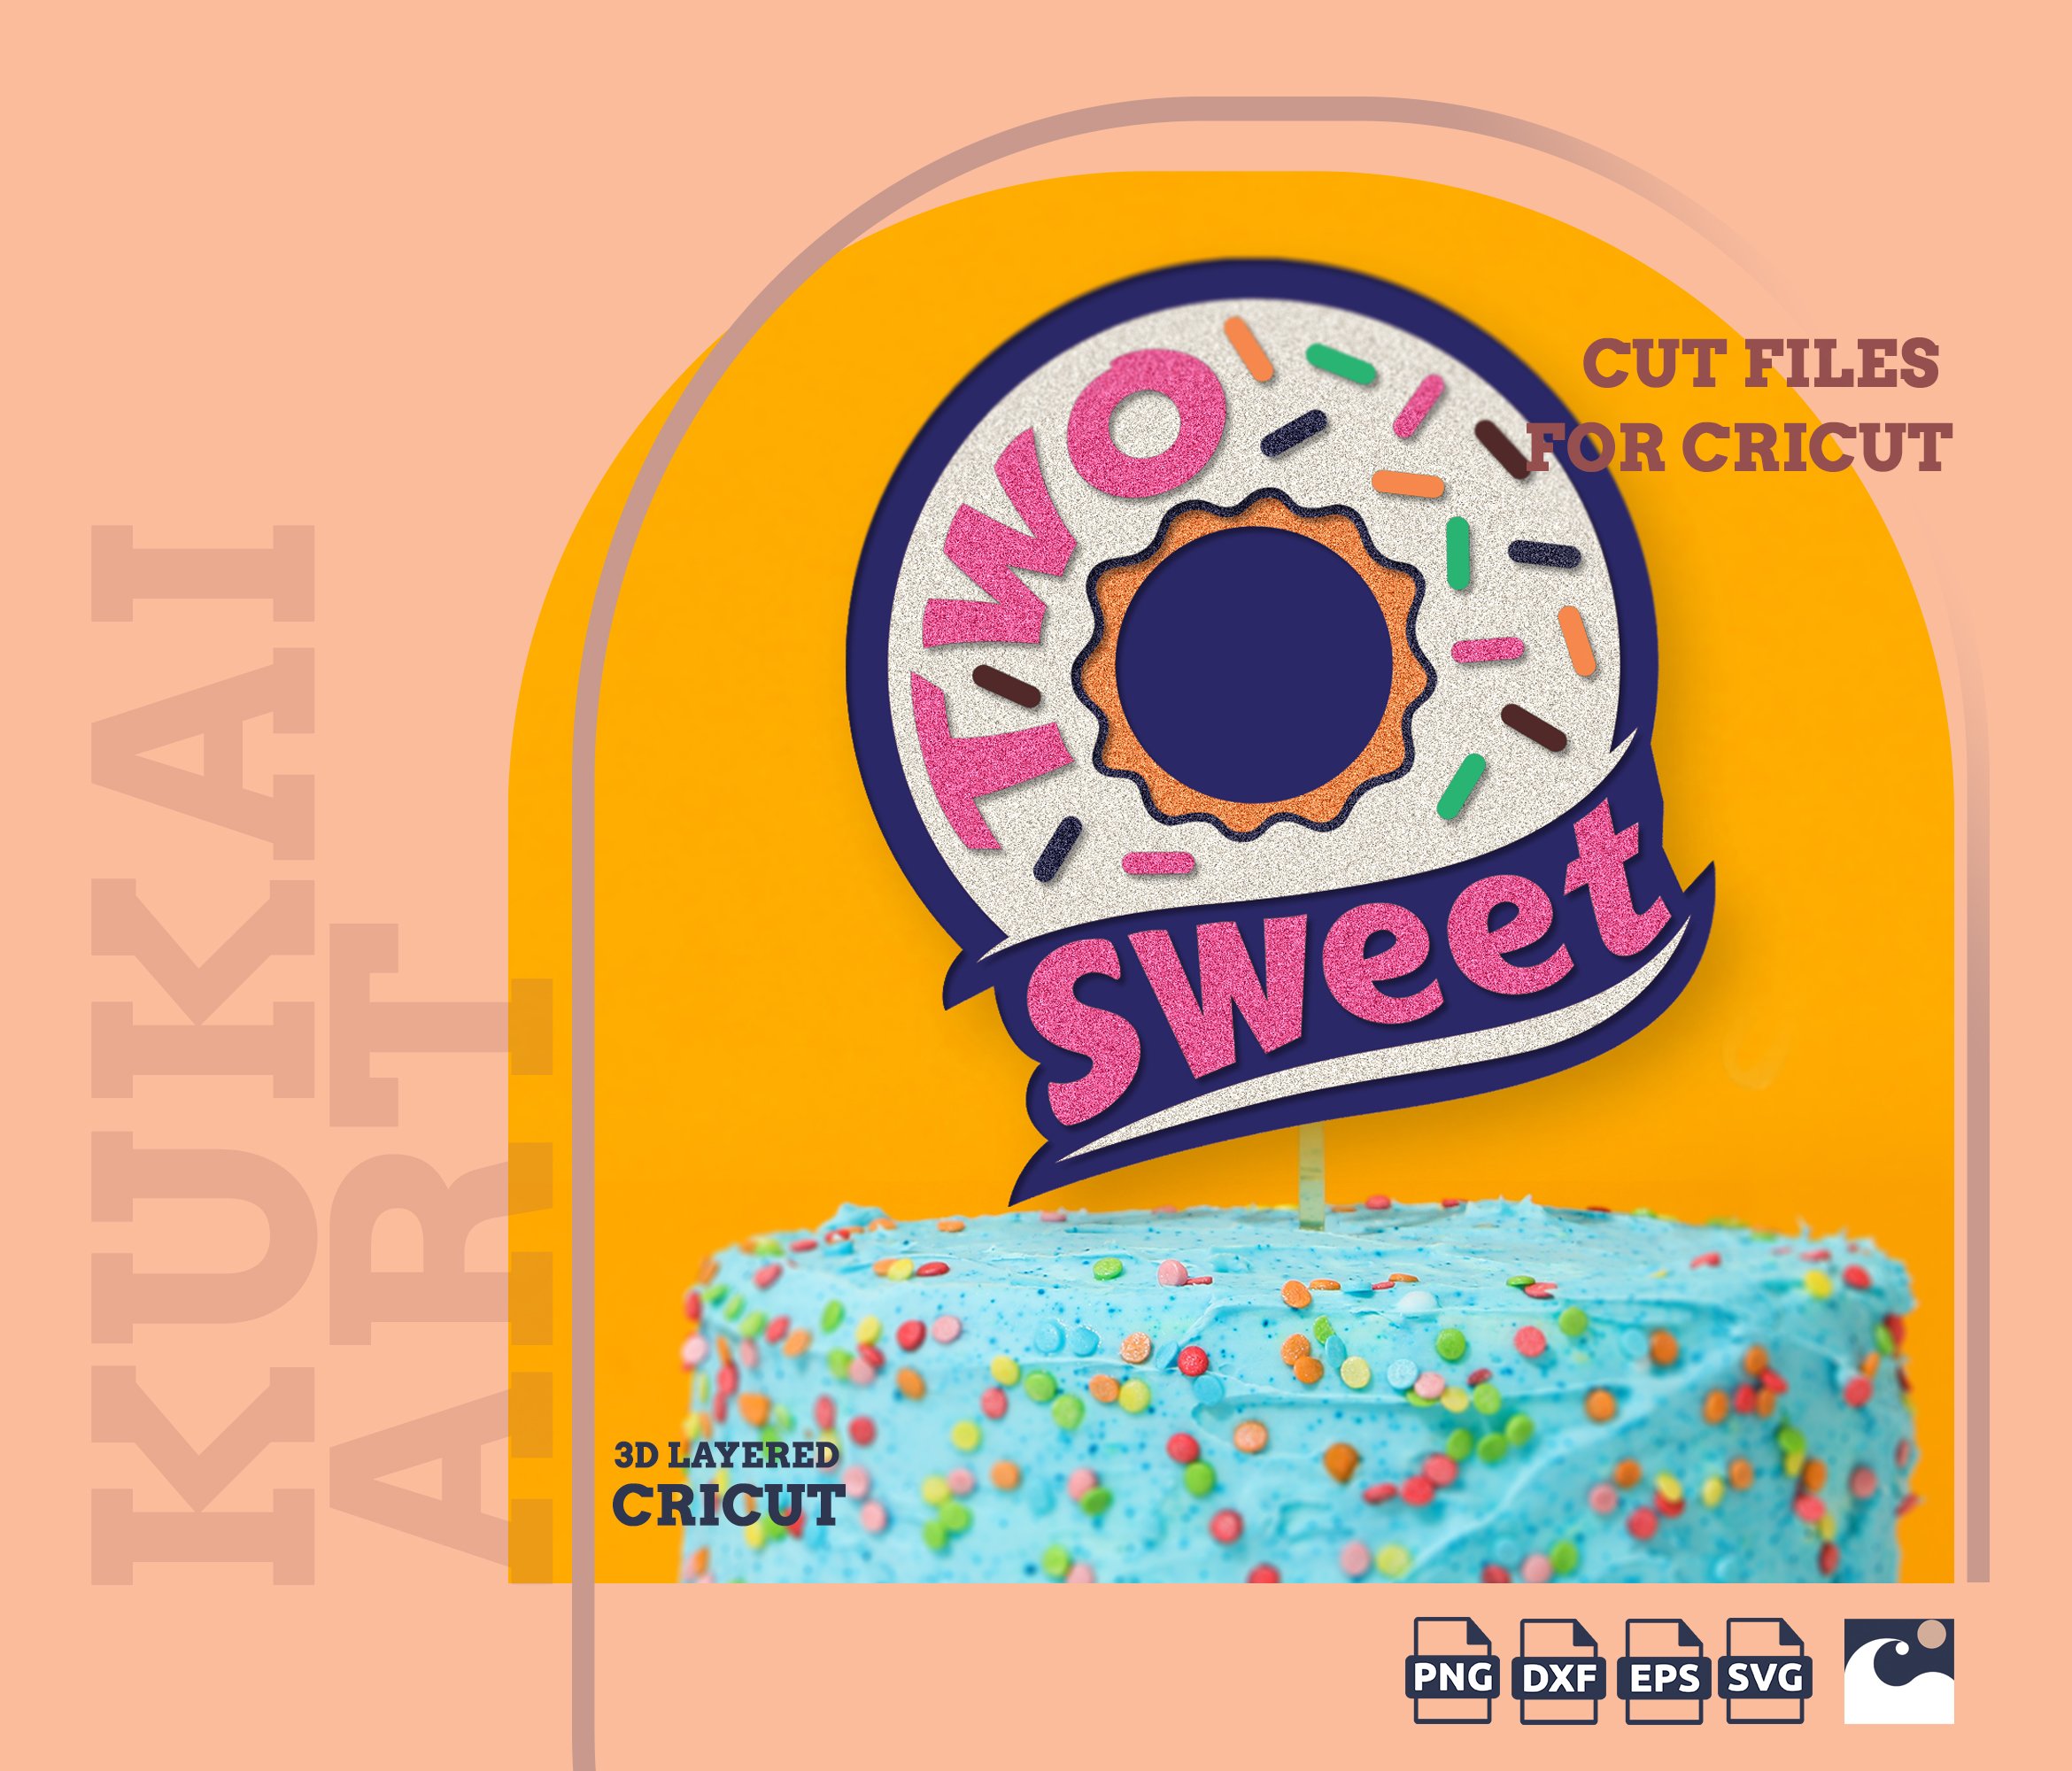 Two-Sweet-Donut-Birthday-3D-Layered-Paper-Cut-File-03.jpg